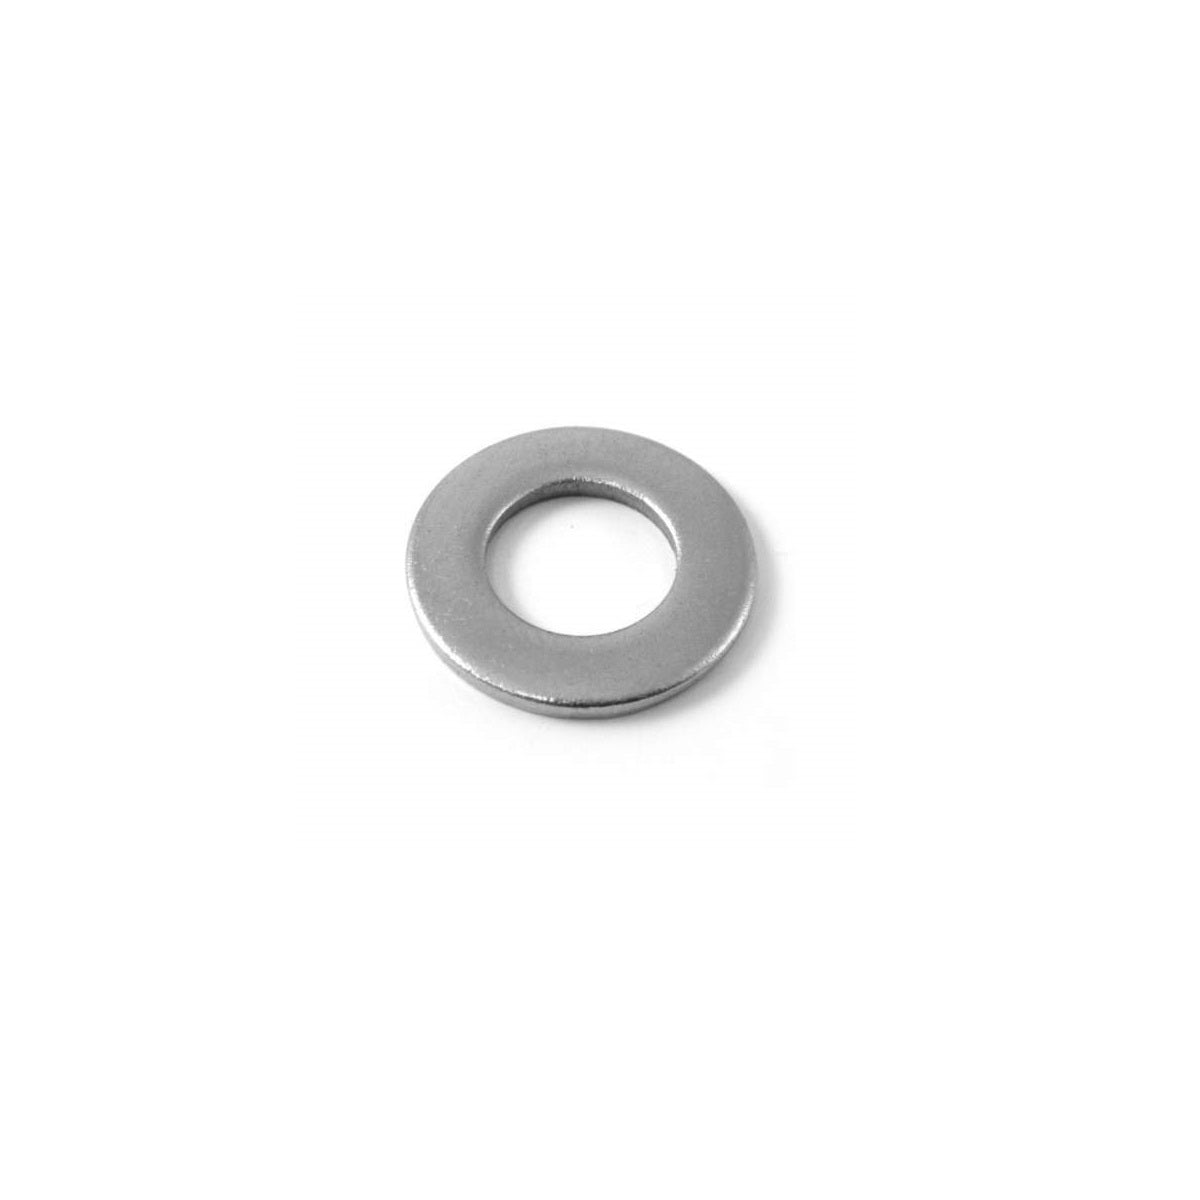 M5 Stainless Steel Flat Washer (1.0mm)